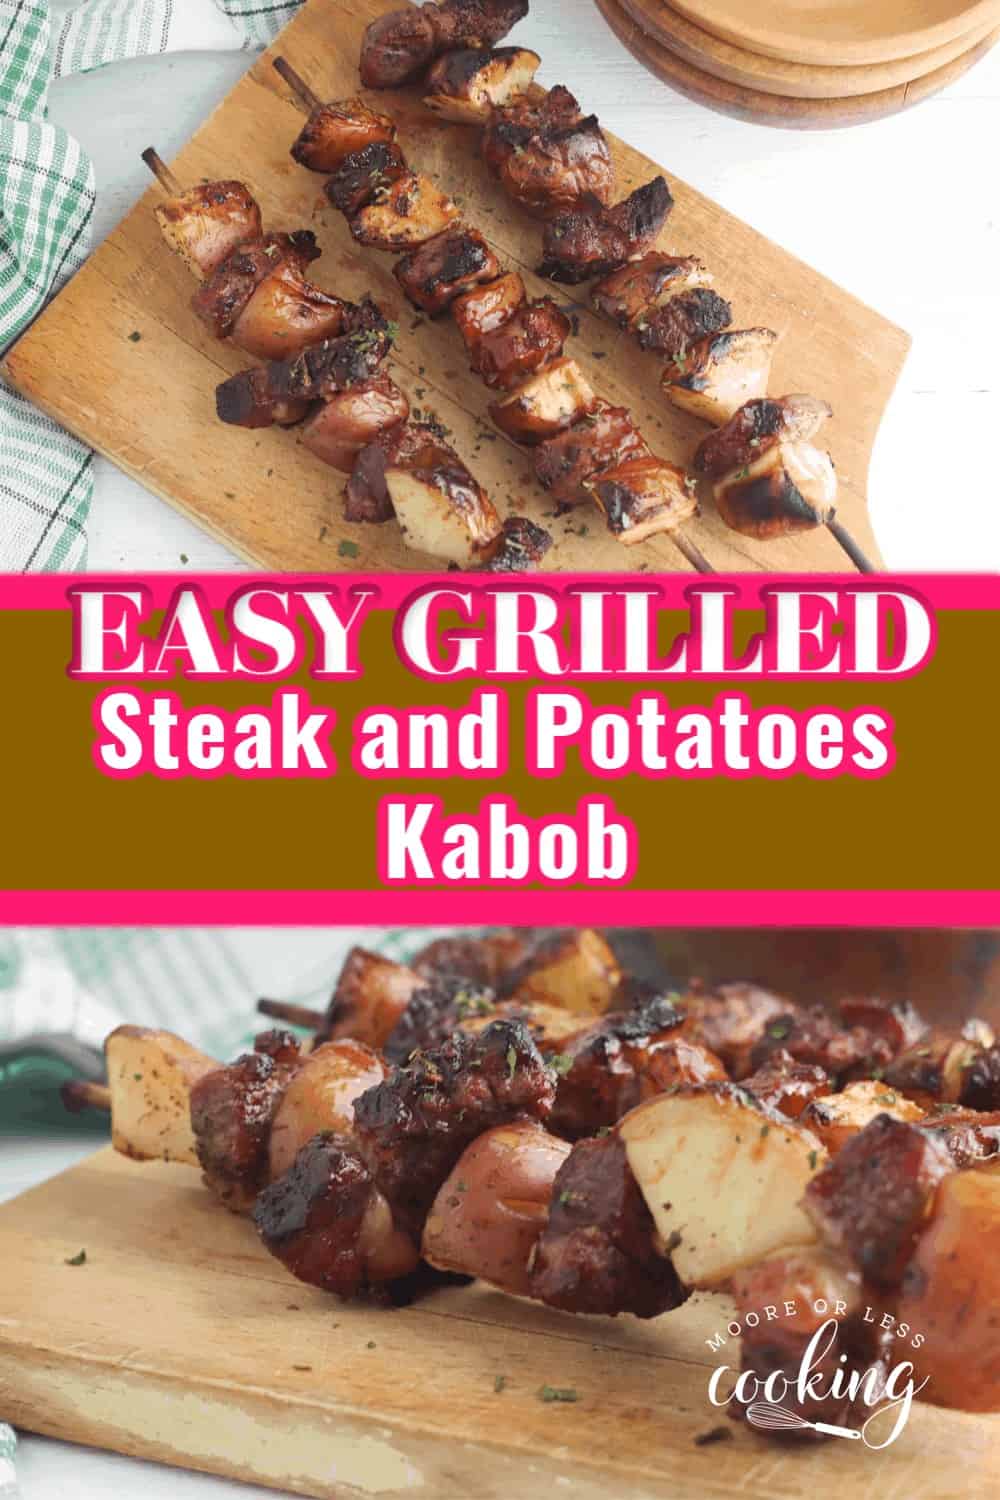 Simple to make Steak and Potato Kabobs are delicious and can be ready so quickly on the grill. Succulent and juicy steak and flavorful caramelized potatoes are perfect for any night dinner. via @Mooreorlesscook